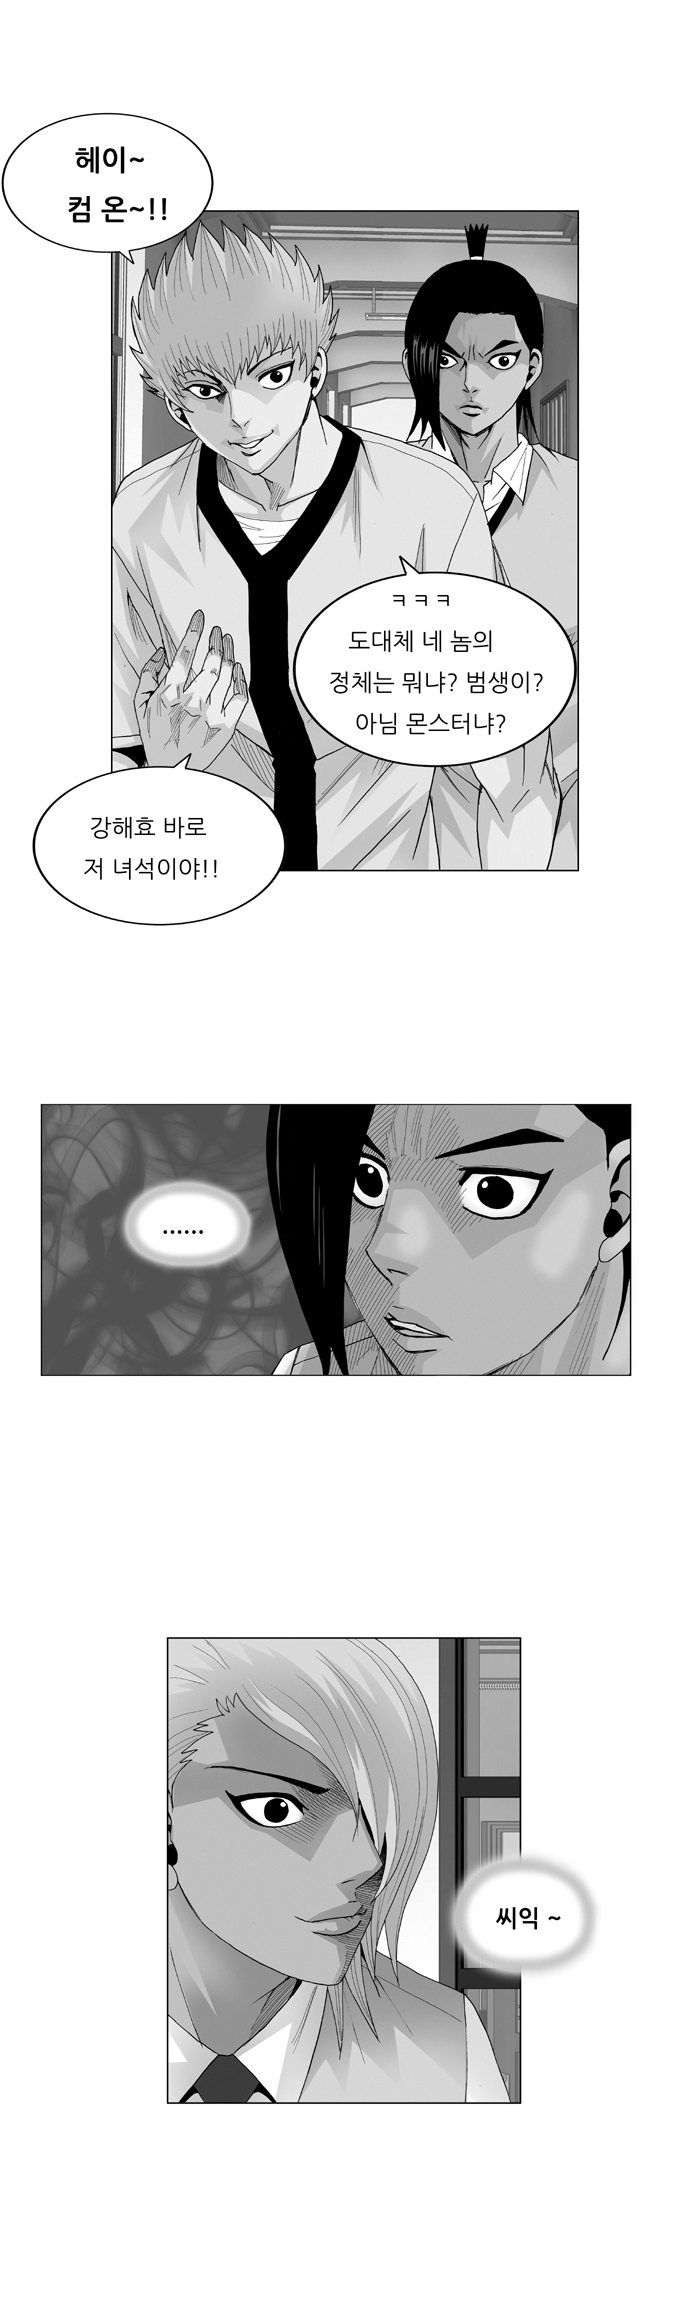 Ultimate Legend - Kang Hae Hyo - Chapter 46 - Page 1